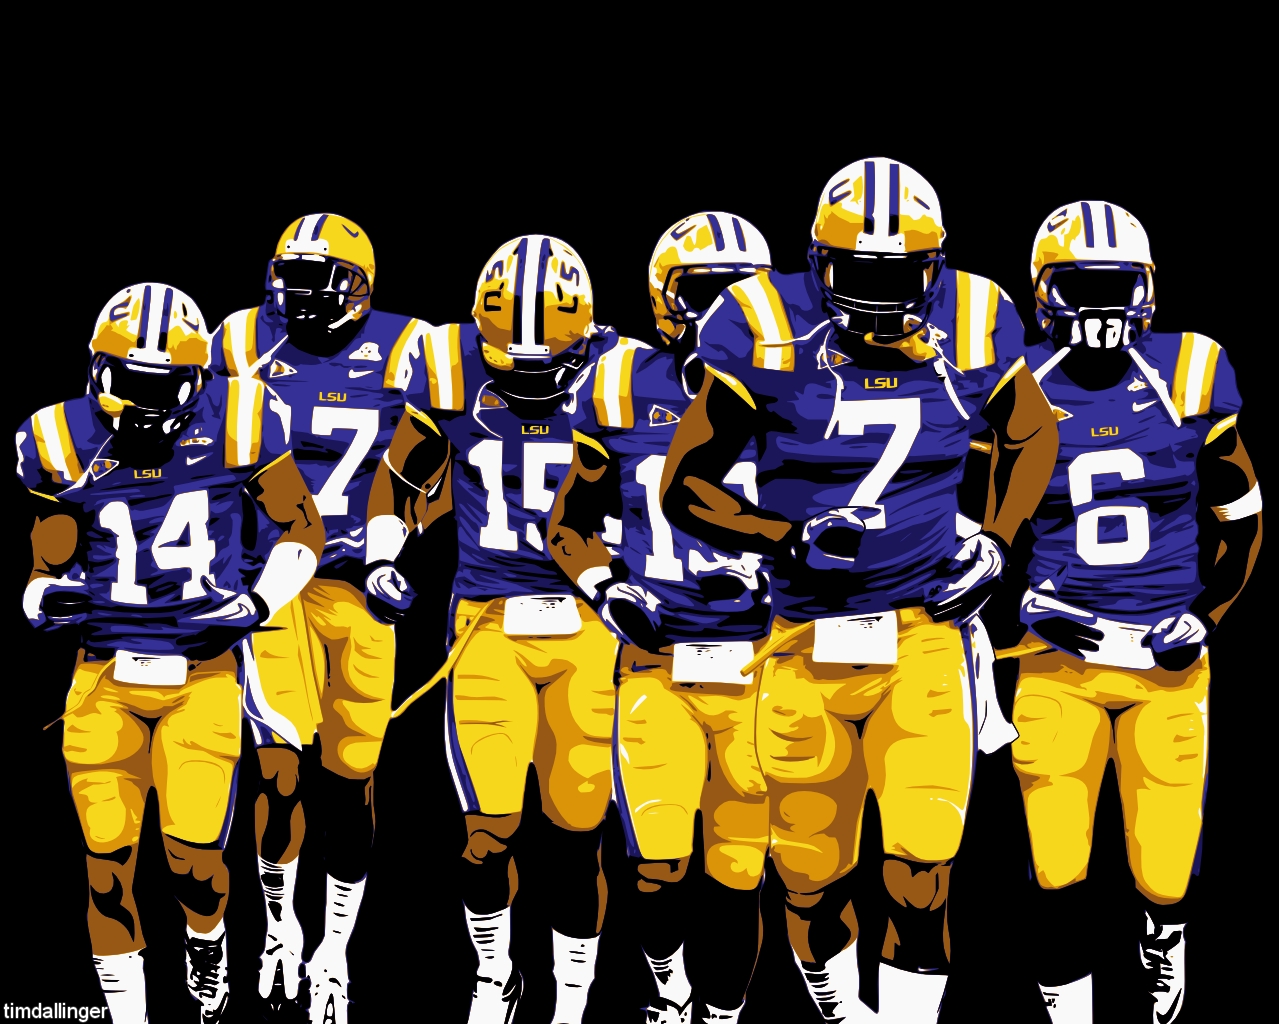 Title : lsu iphone wallpapers group (46+) Dimension : 1279 x 1024 File Type...